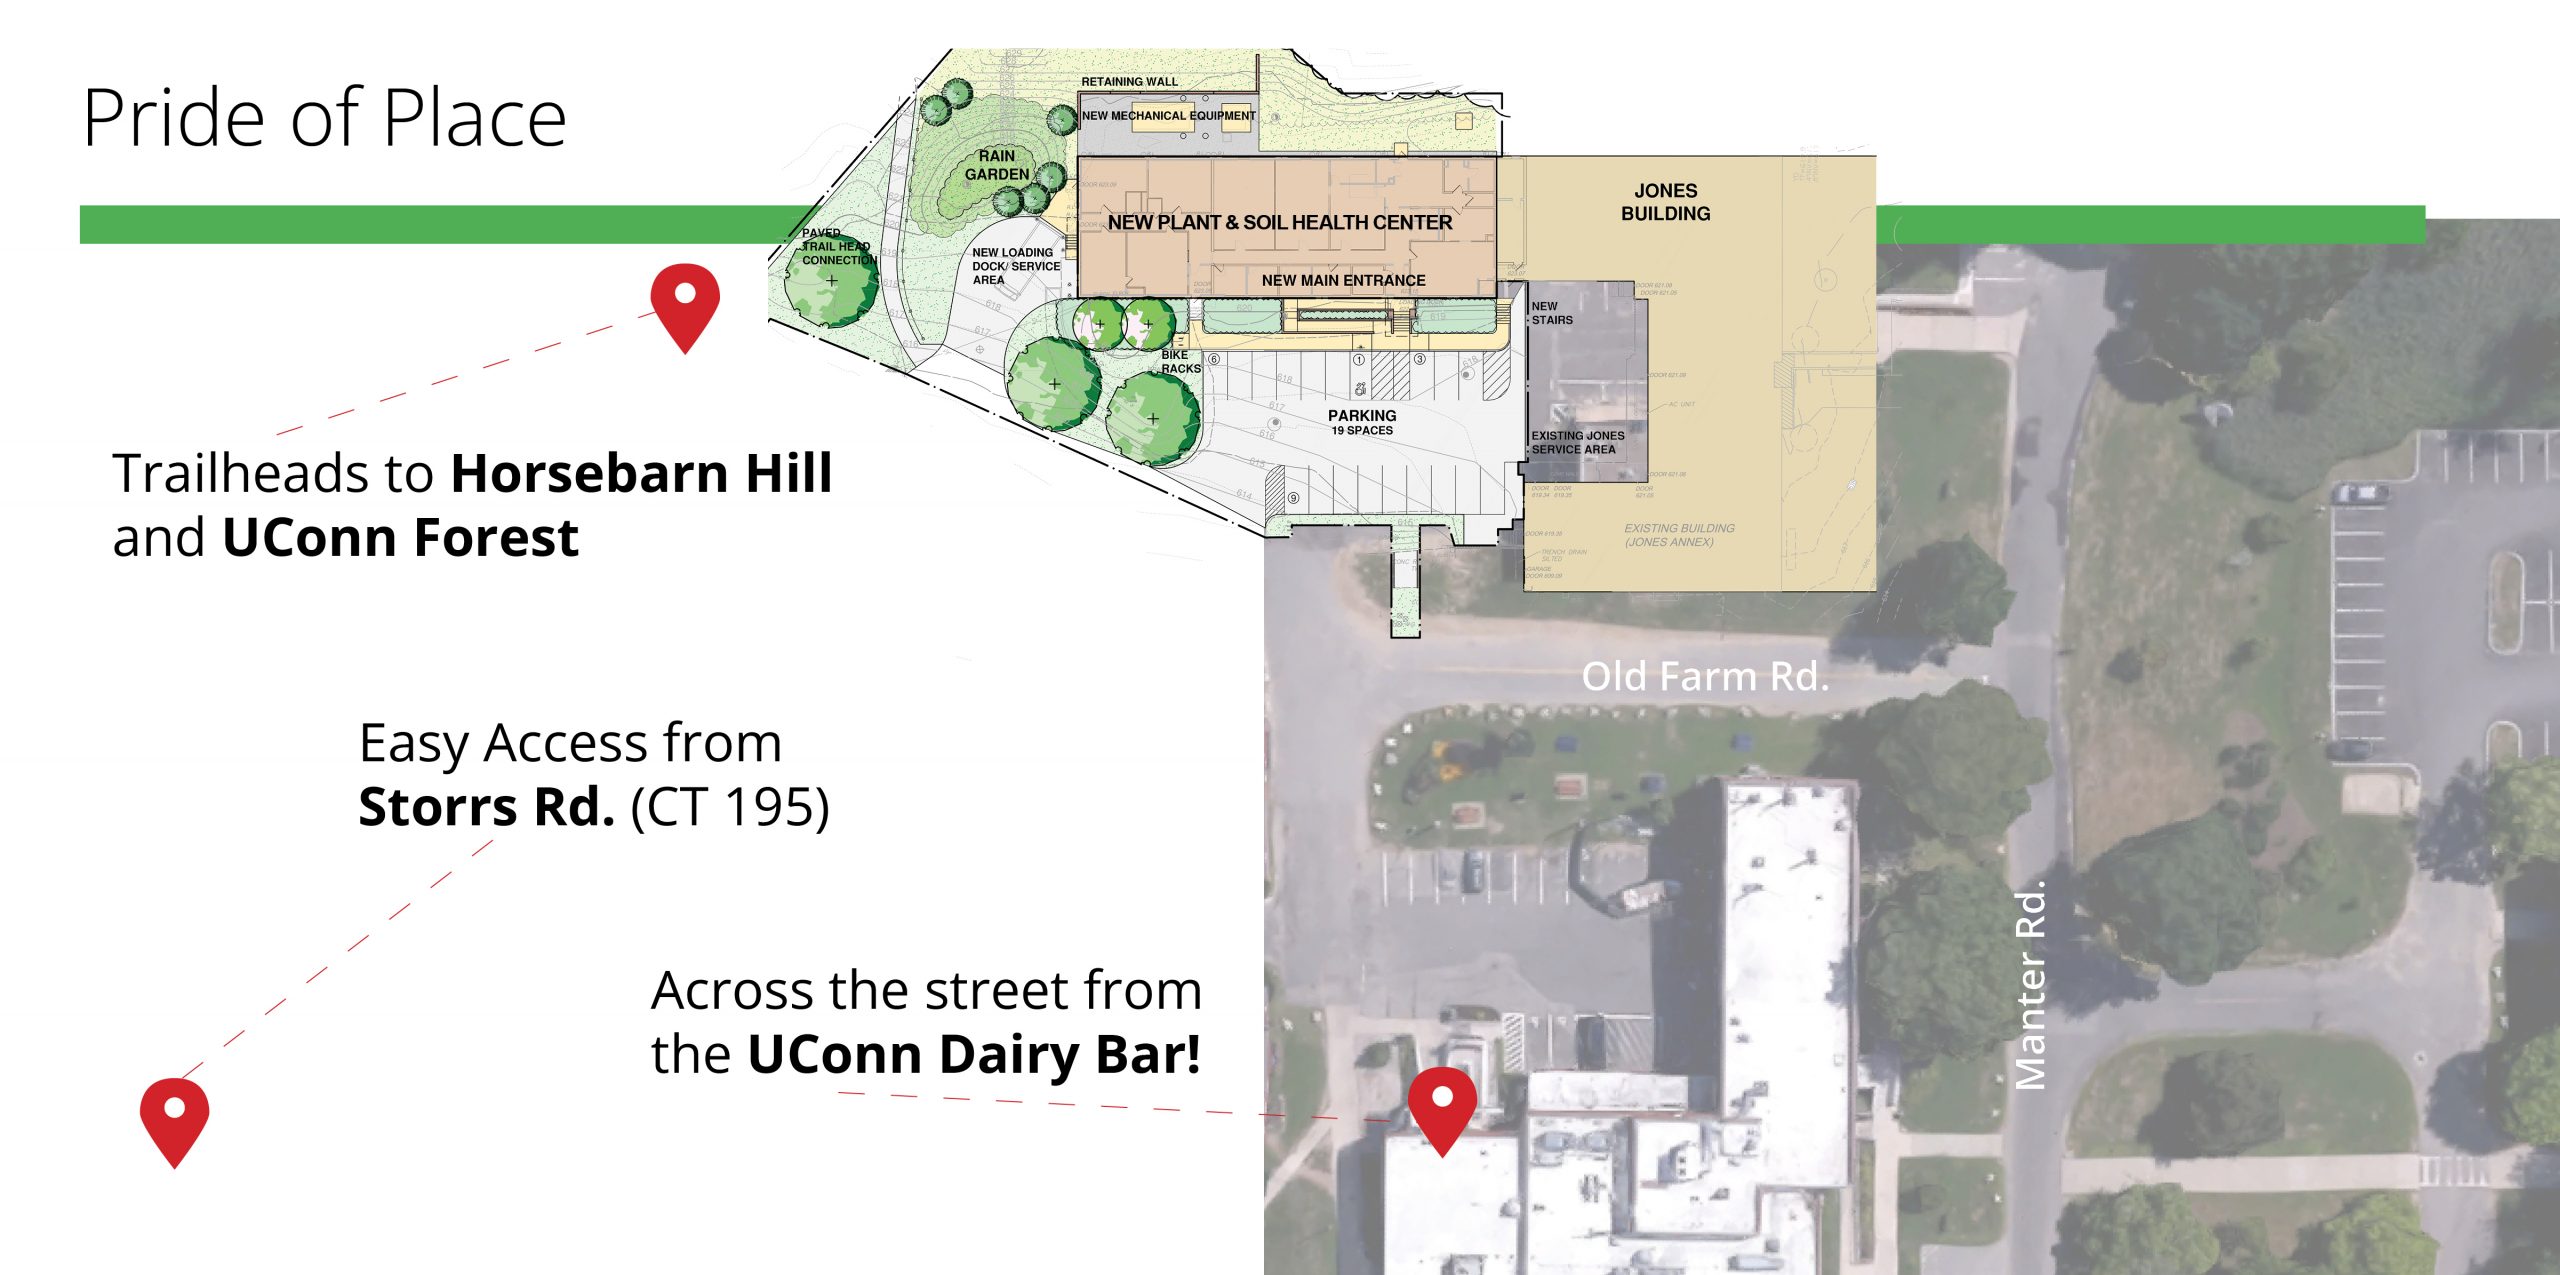 Satelite and architectural overview of the new Plant and Soil Health Center in the Jones Building Annex. Highlights the proximity to Uconn Forest, Horsebarn Hill, UConn Daity Bar and Route 195.